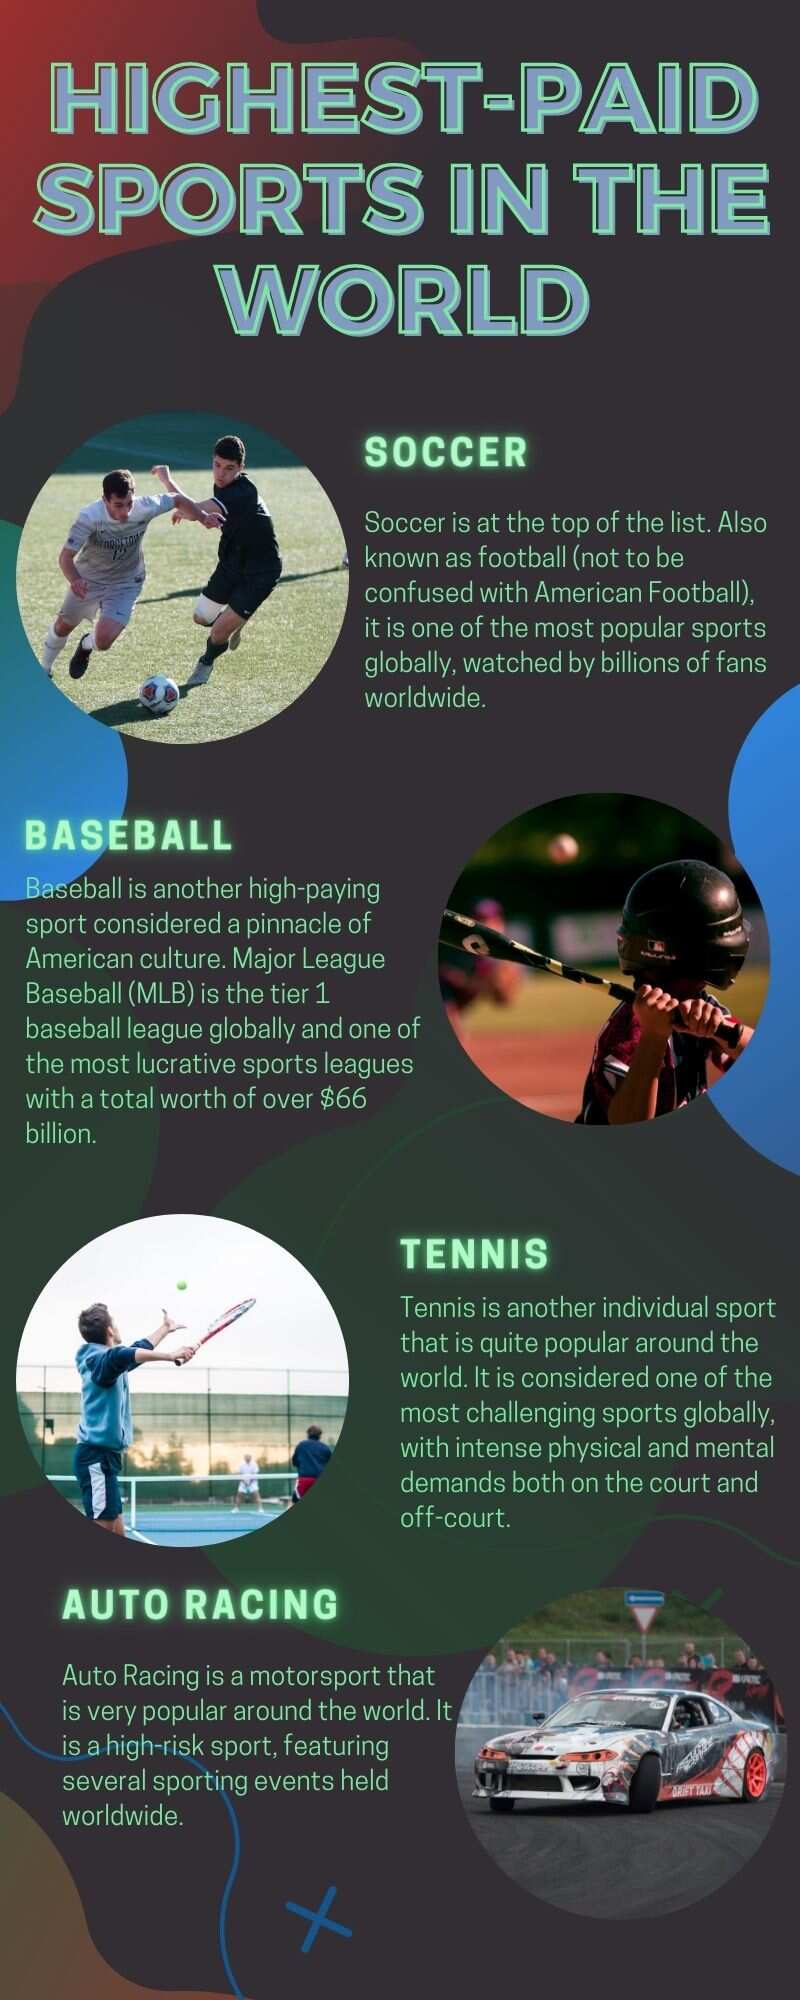 Hhighest-paid sports in the world